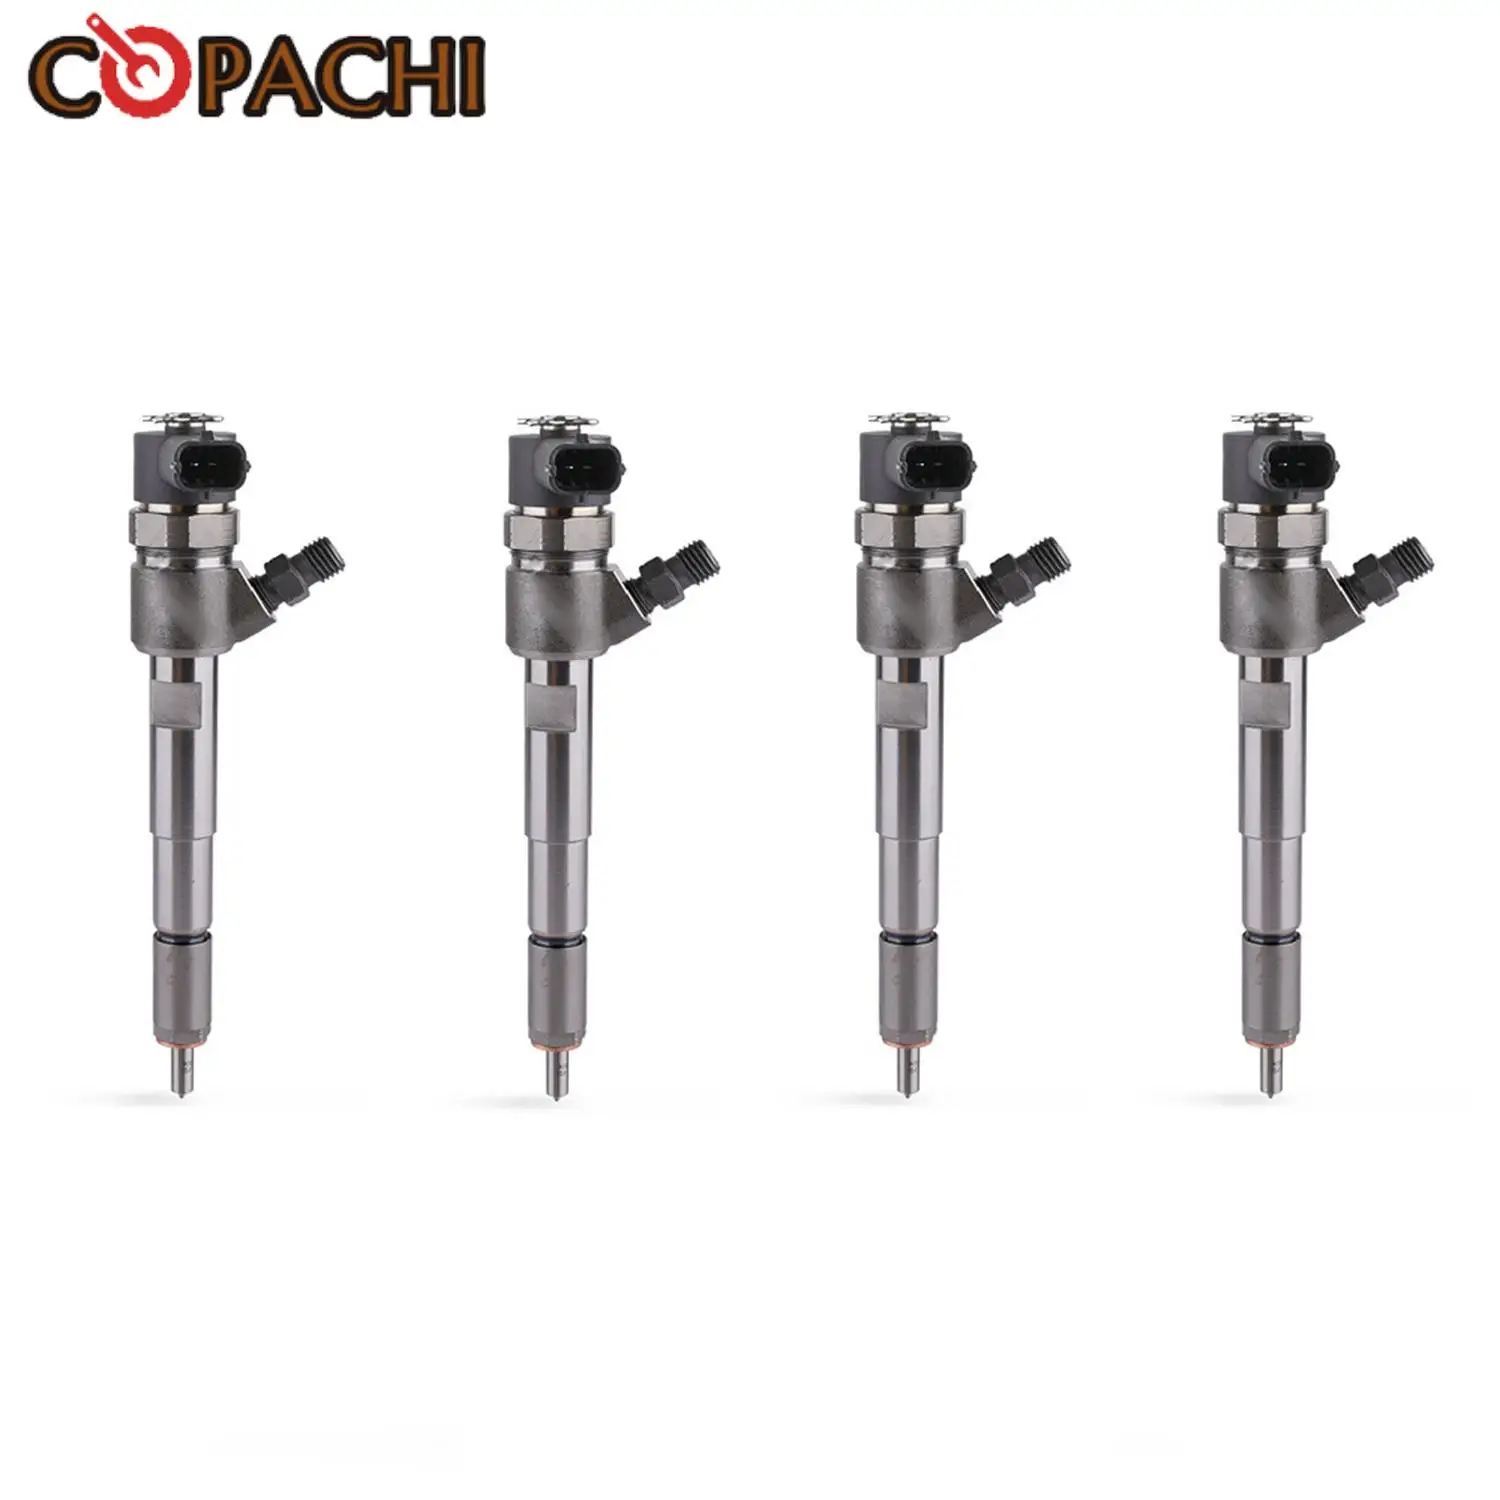 

0445110217 5159970AA 4Pcs Fuel Injectors For 2005-2006 Jeep Liberty CRD 2.8L Diesel With 6 Months Warranty